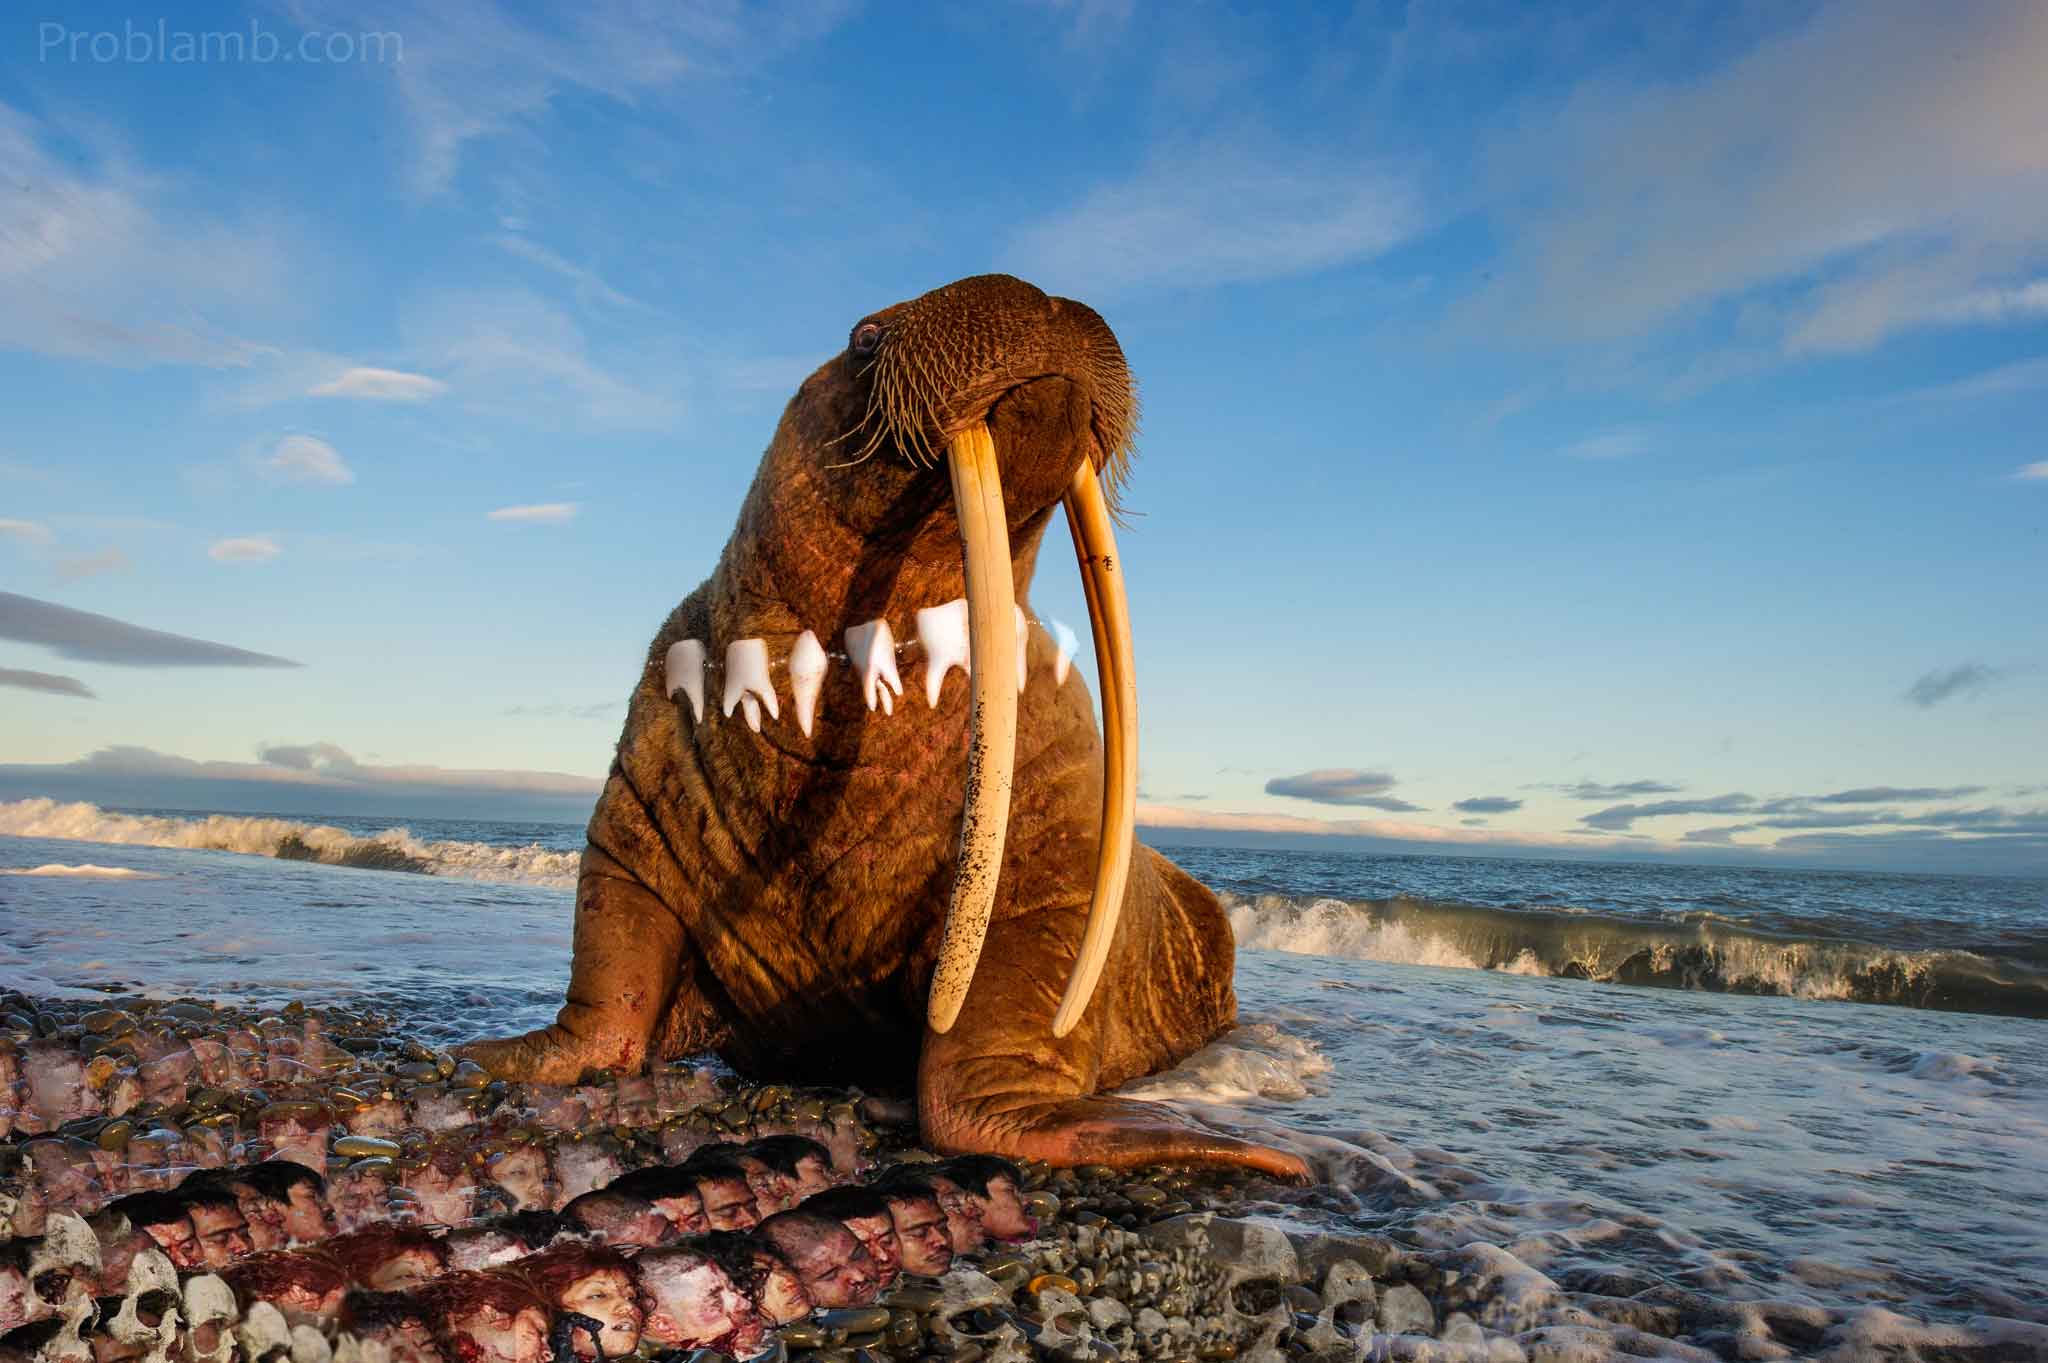 Walrus with human ivory necklace and decapitated heads